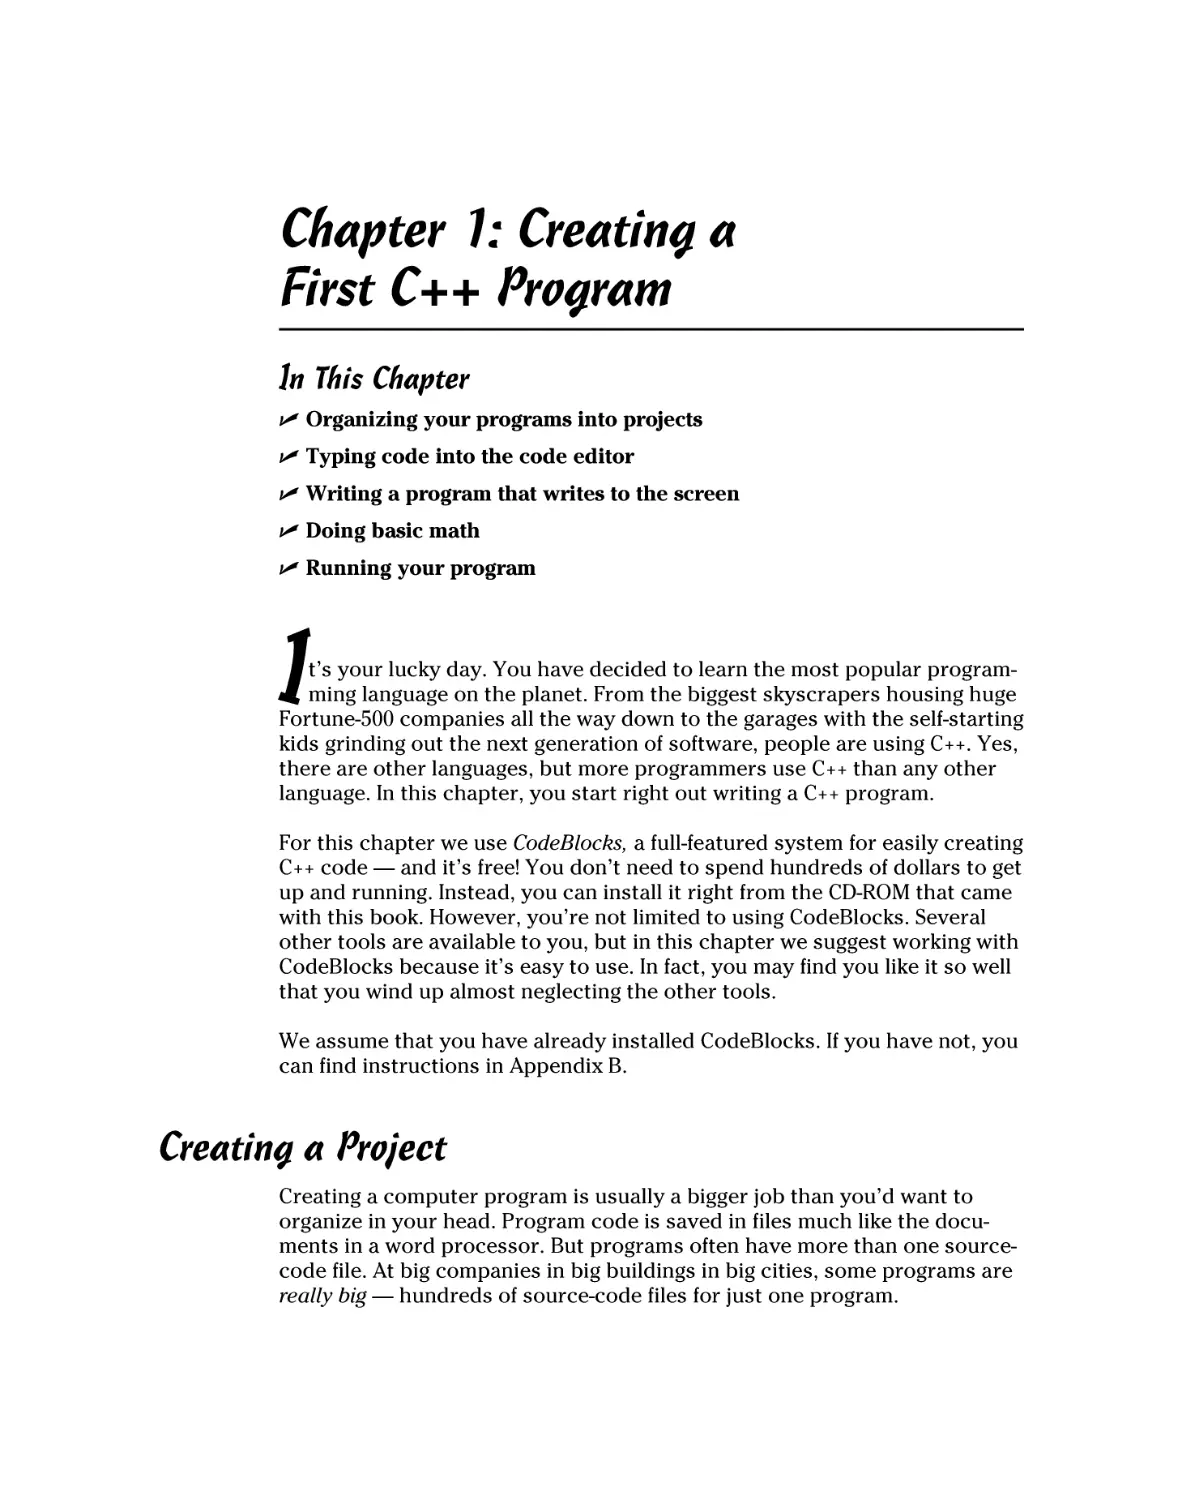 Chapter 1
Creating a Project